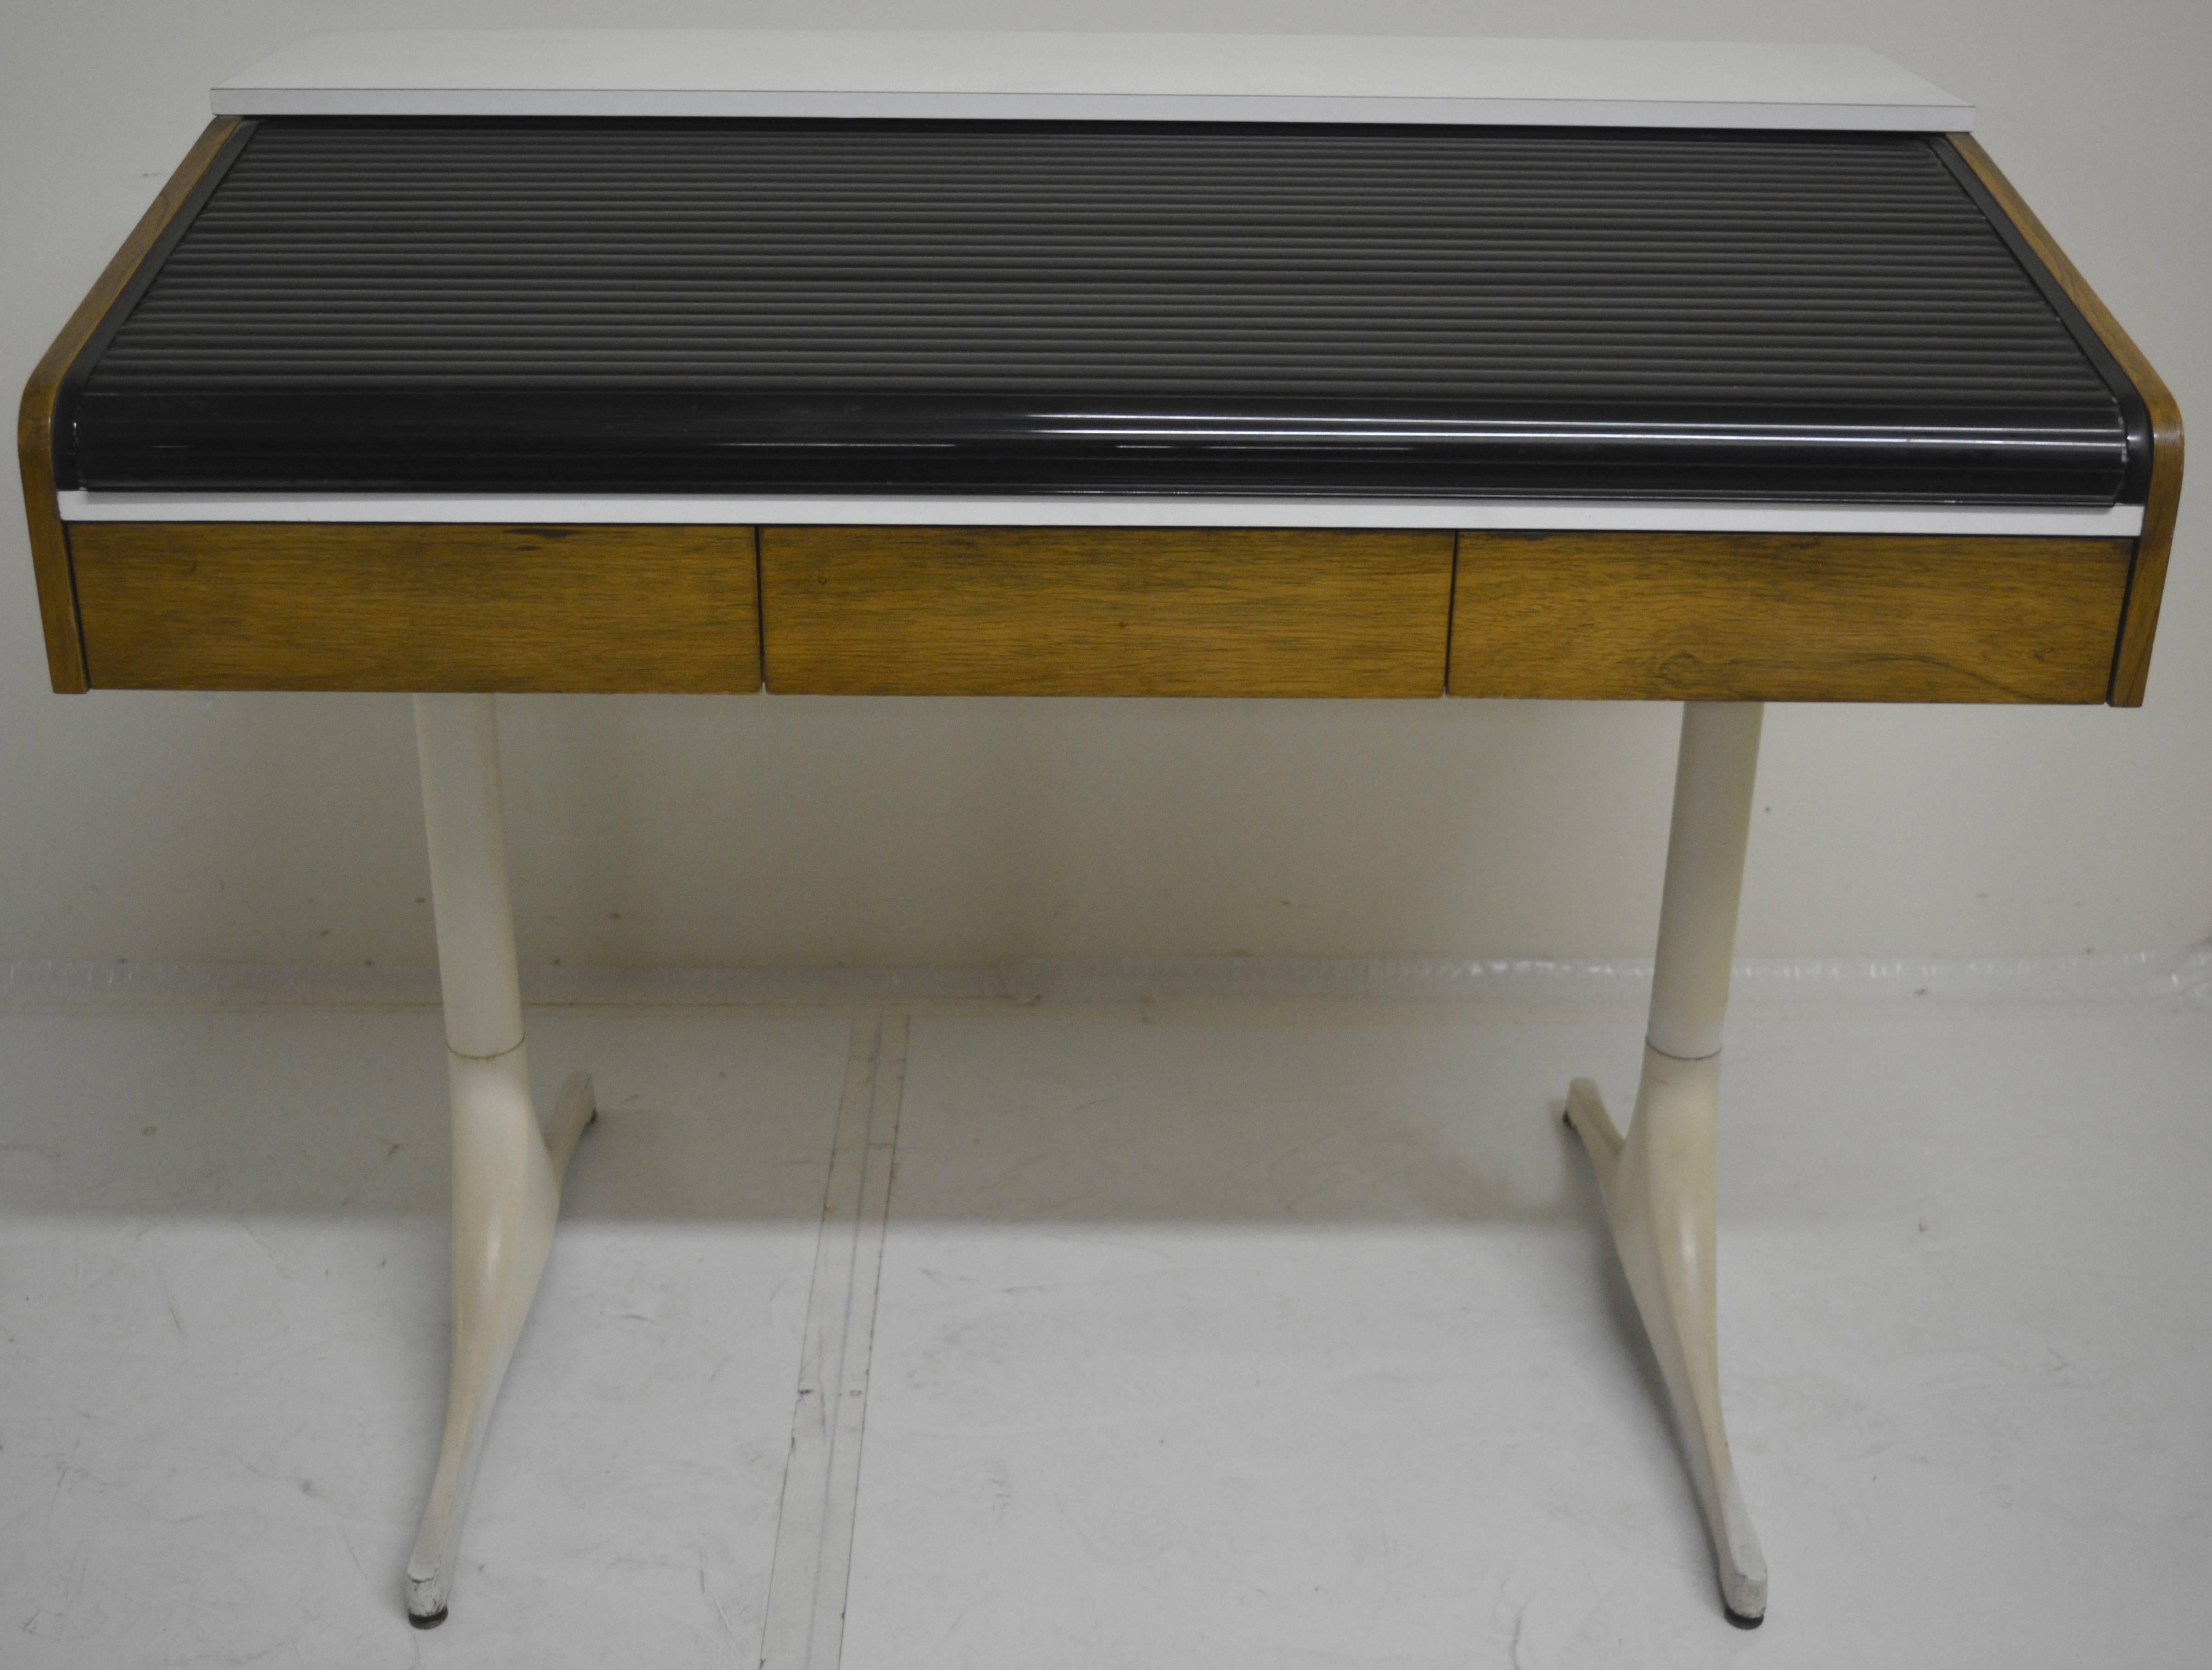 Very Rare and offered by Herman Miller for only two years and produced by special order, the Roll Top Pedestal desk is one of Nelson's rarest designs. Made of rosewood, laminate, and enameled aluminum with a cast base, this desk is in remarkable